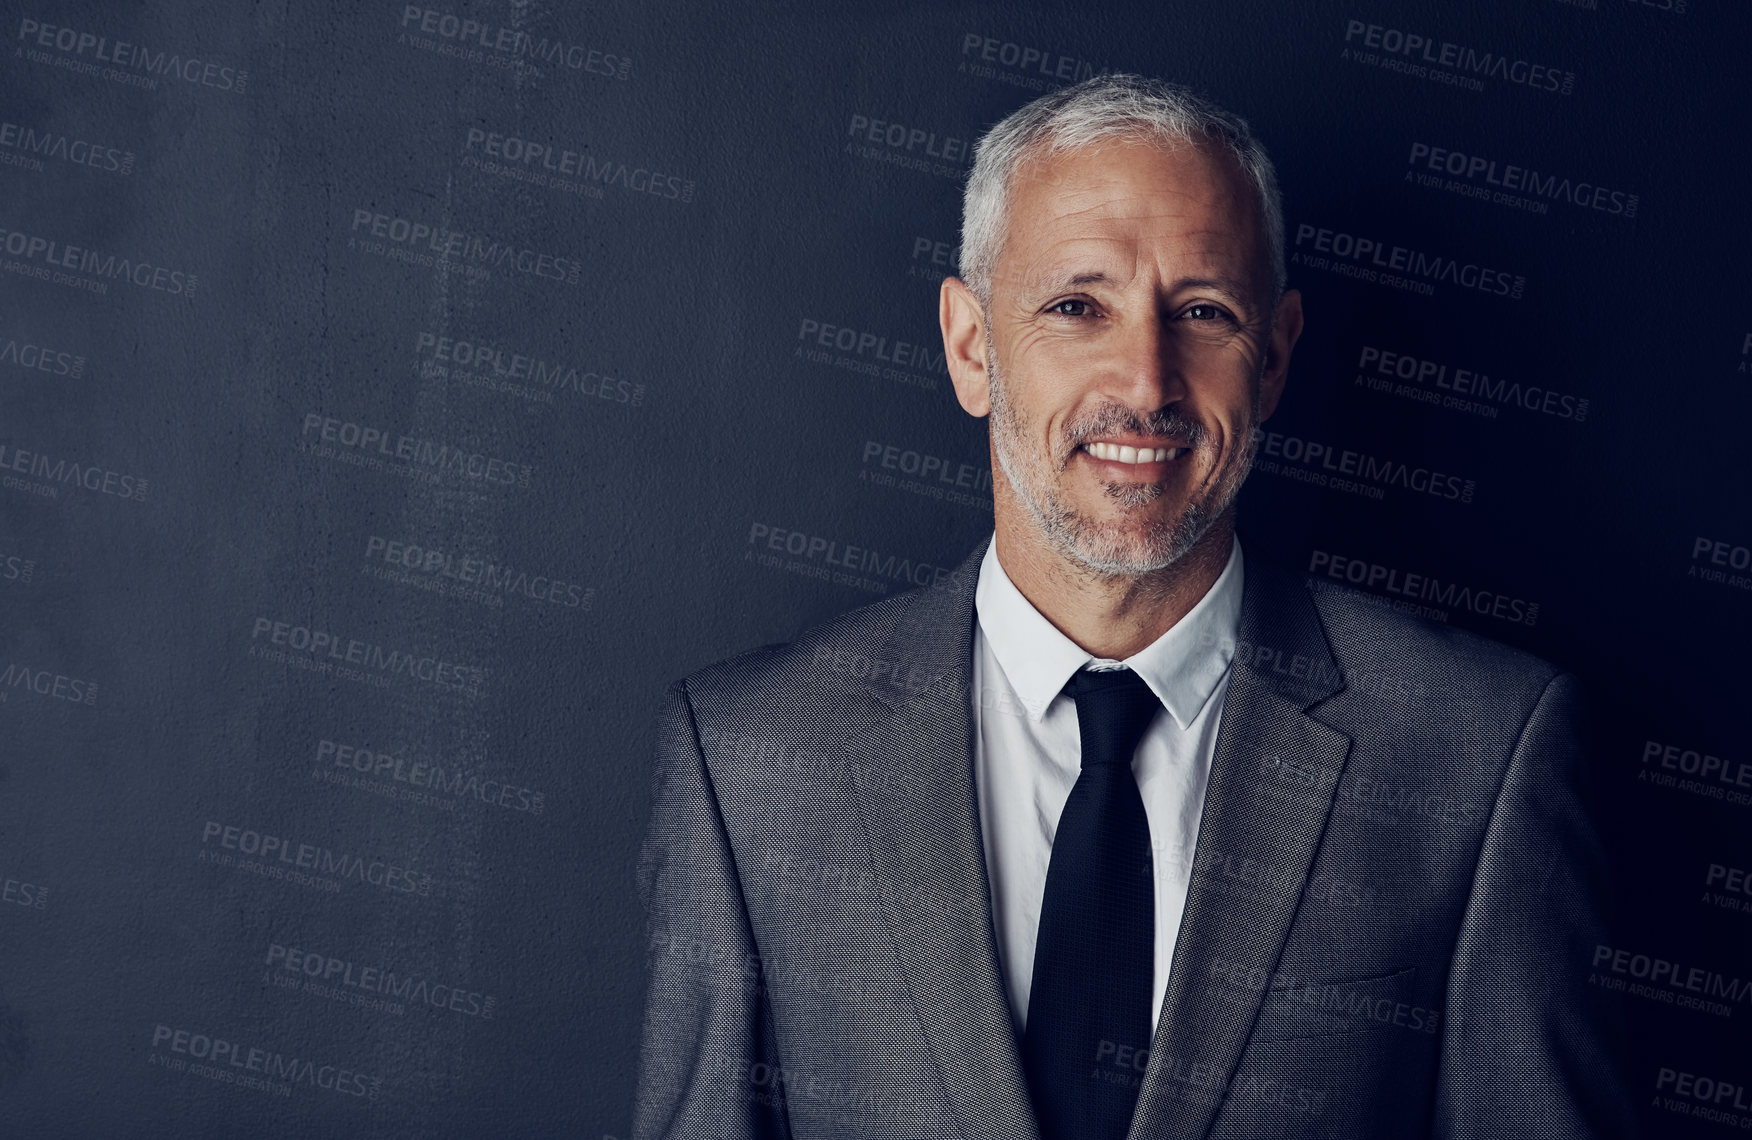 Buy stock photo Mockup, confidence and smile, portrait of businessman in suit and pride on dark background. Boss, ceo and business owner with professional career, happy senior director with executive management job.